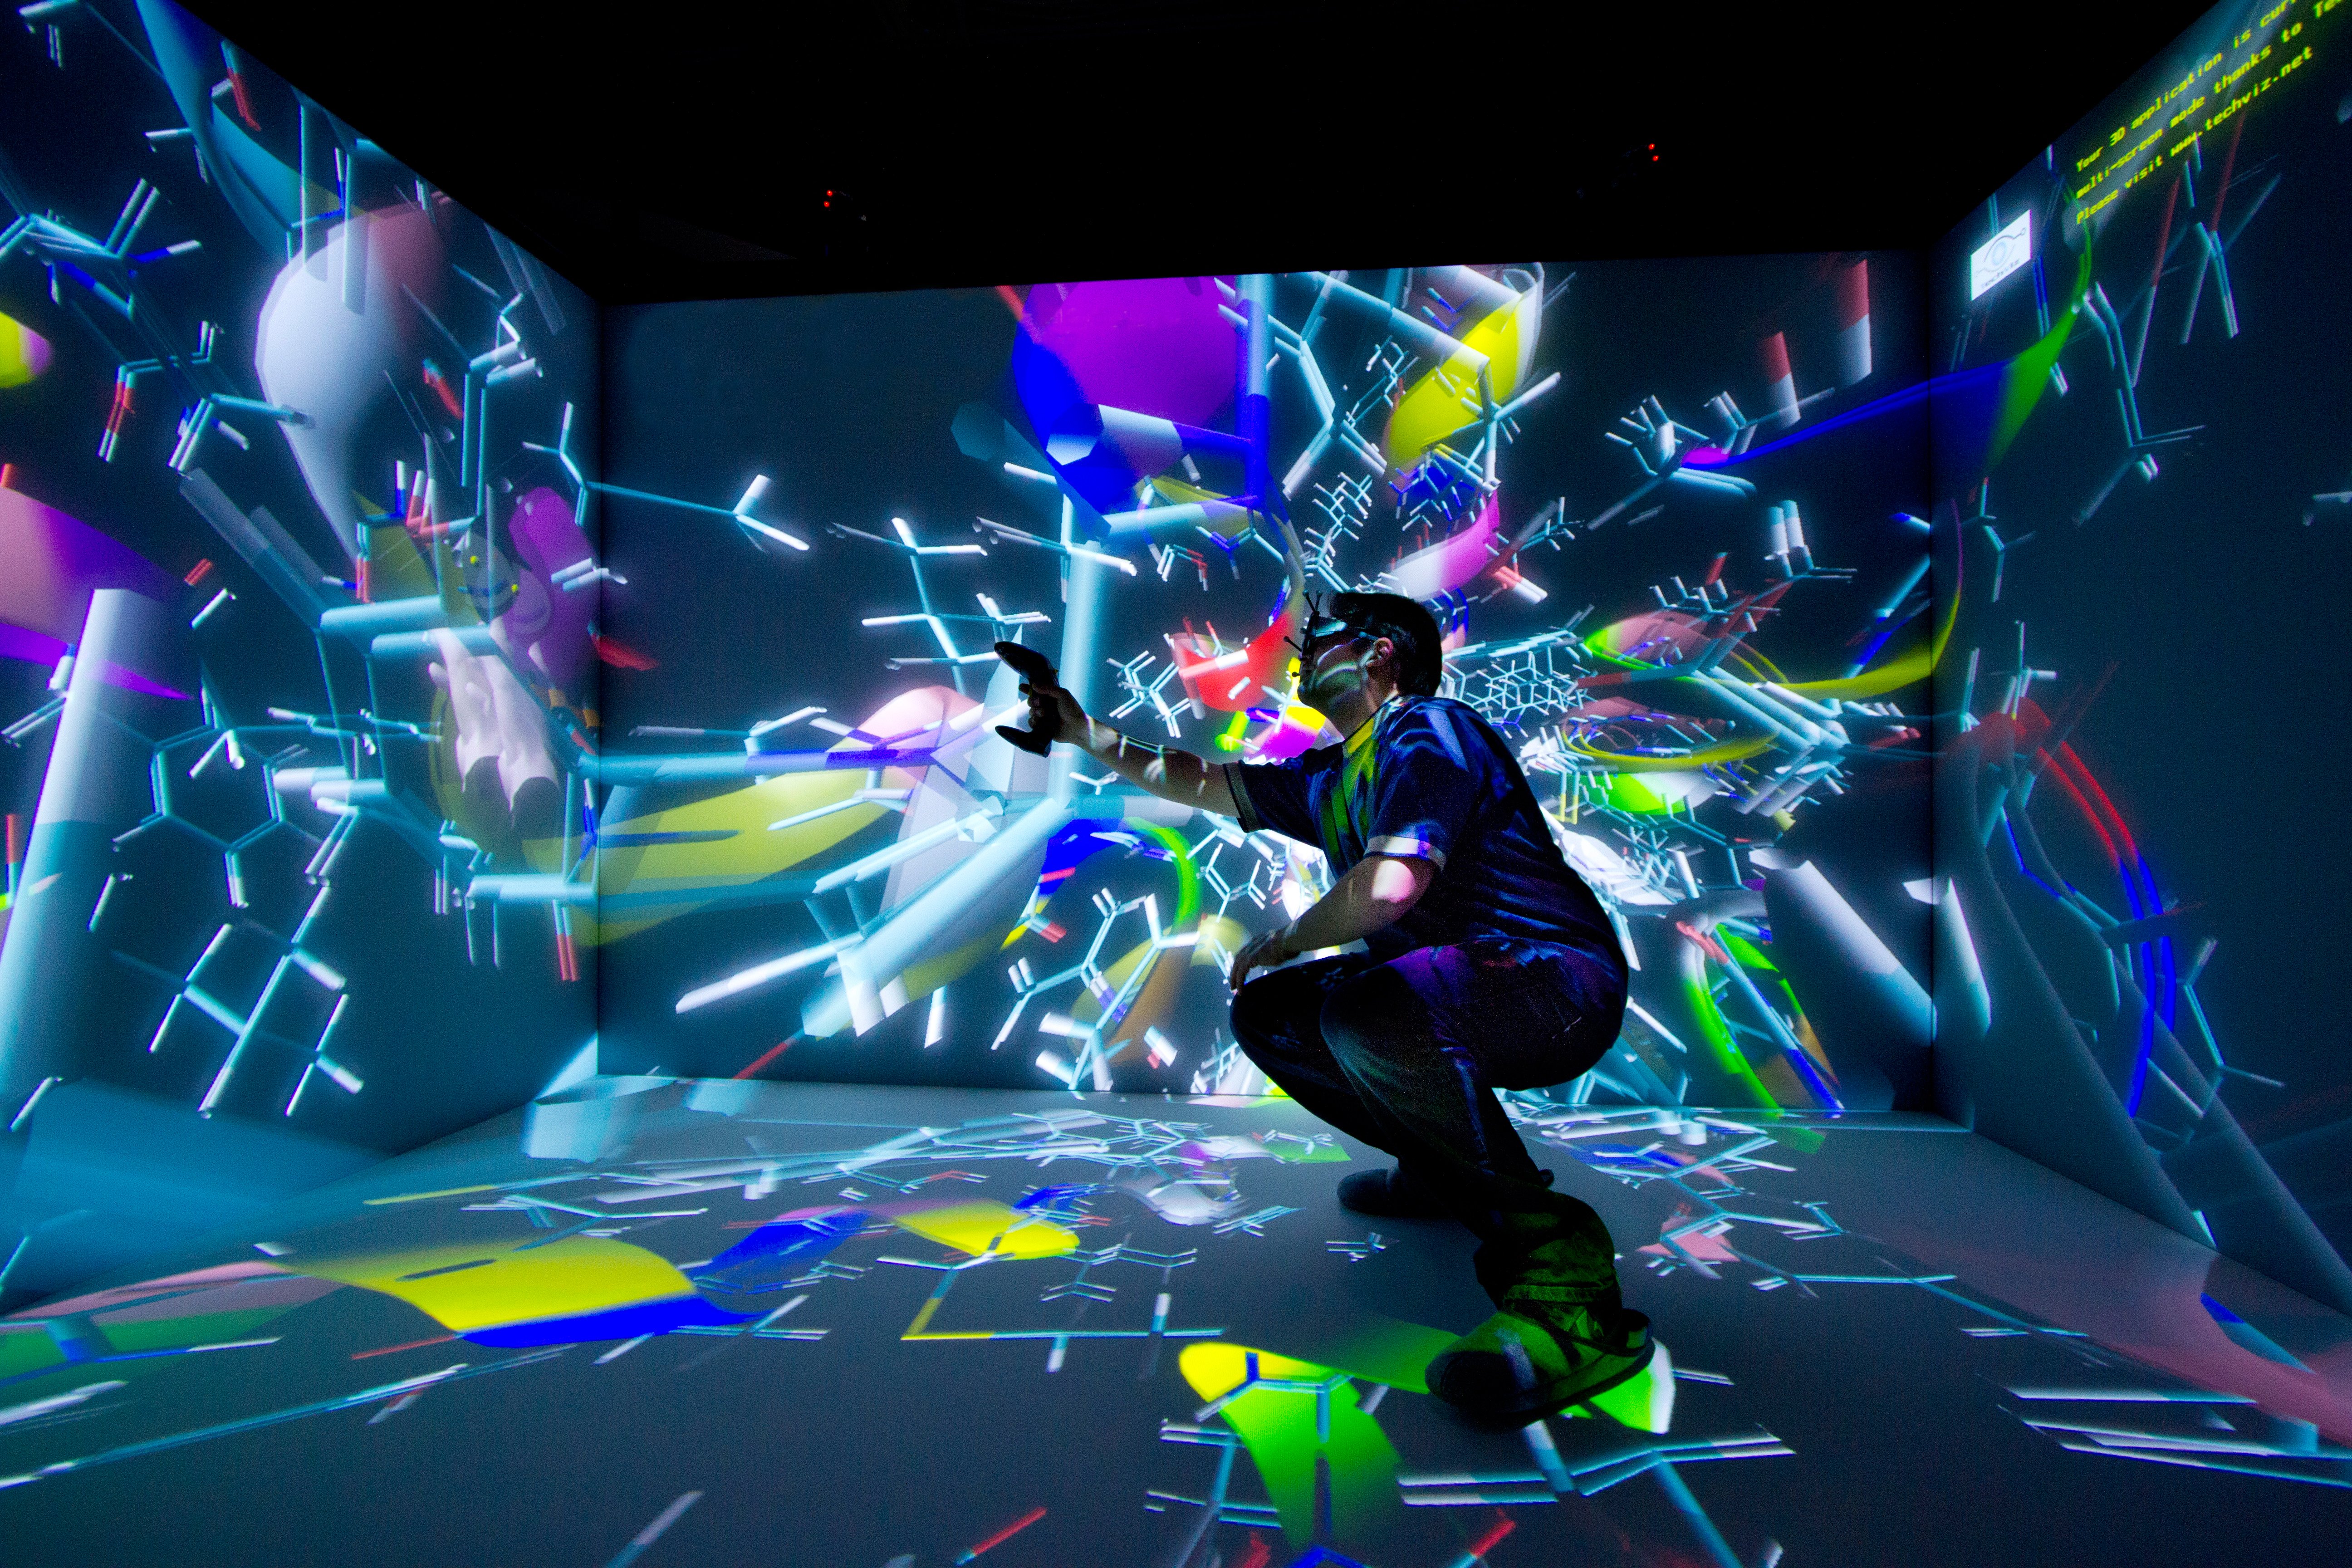 visualizing data in 3d with vr  in a immersive room